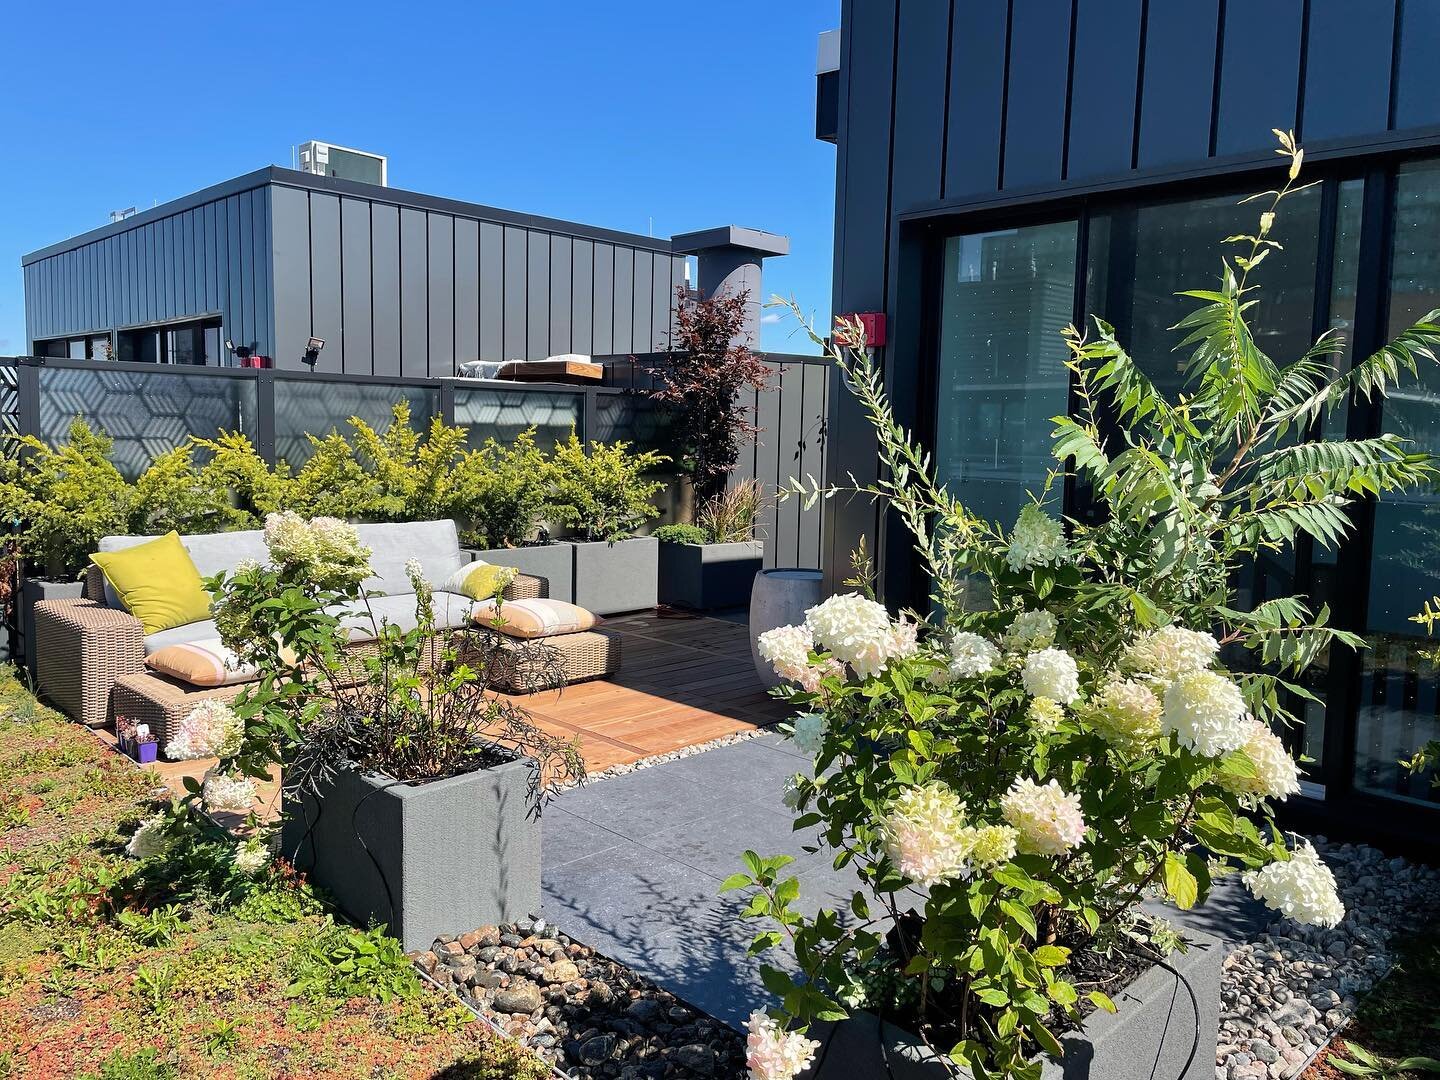 650 sqft green roof with a charcoal colour scheme. Sunburst yews create a privacy wall in our custom insulated planter boxes. A variety of dappled willows and hydrangeas surround our modular Ipe decking, charcoal porcelain tiles and river rock.